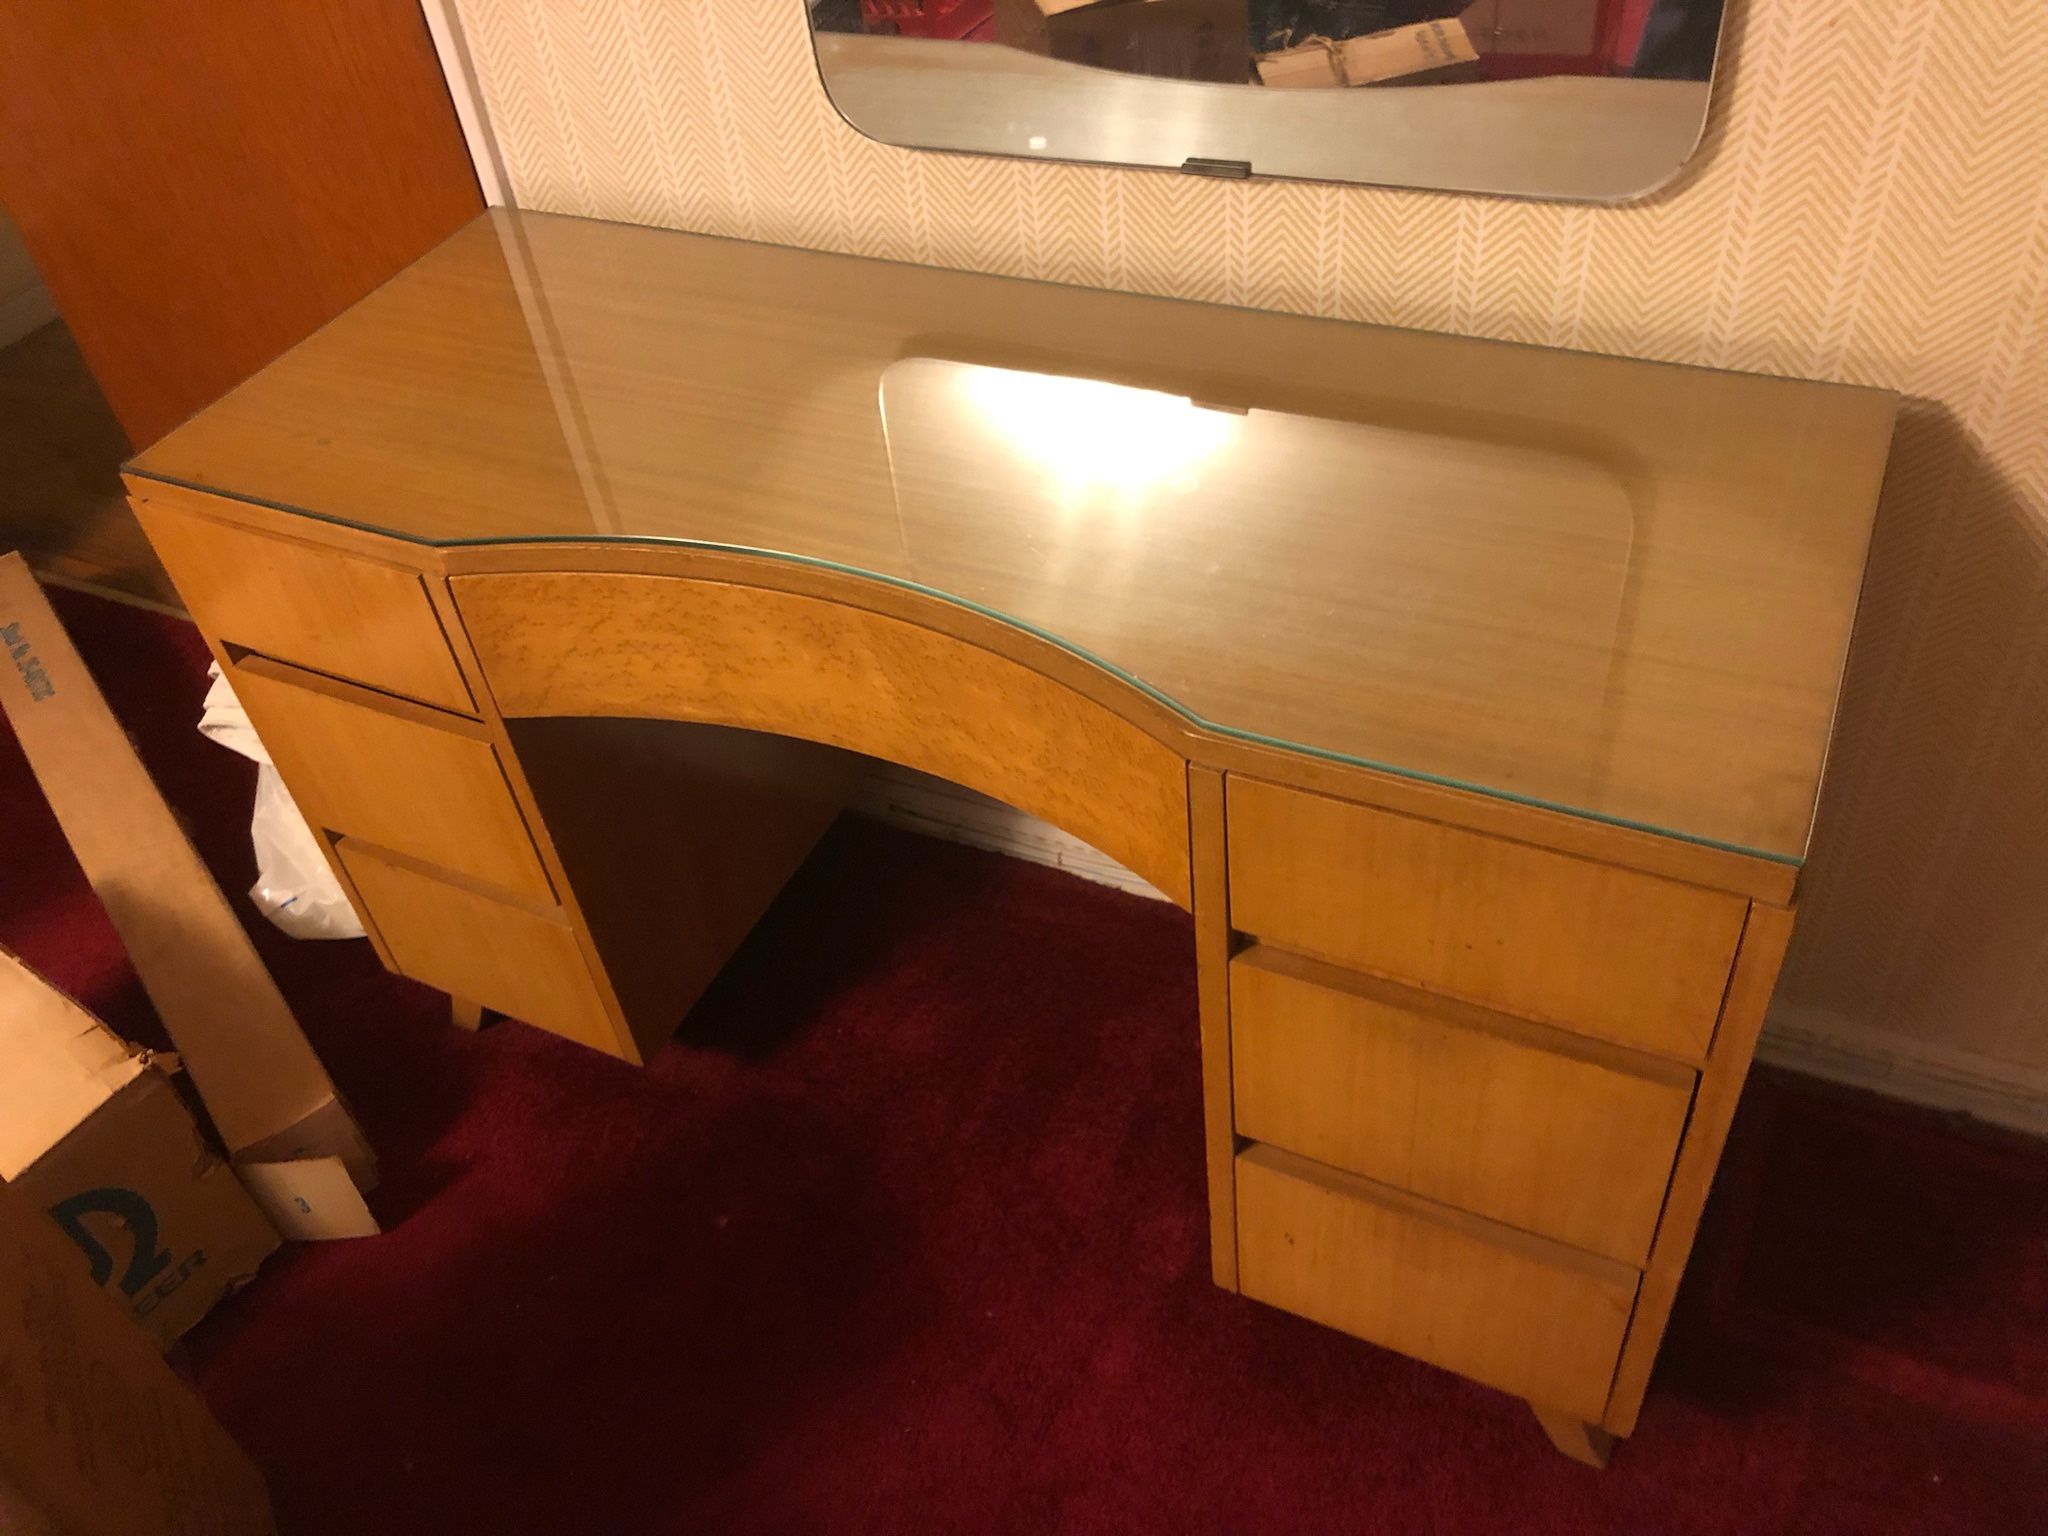 Vanity/ Desk Without Glass Top